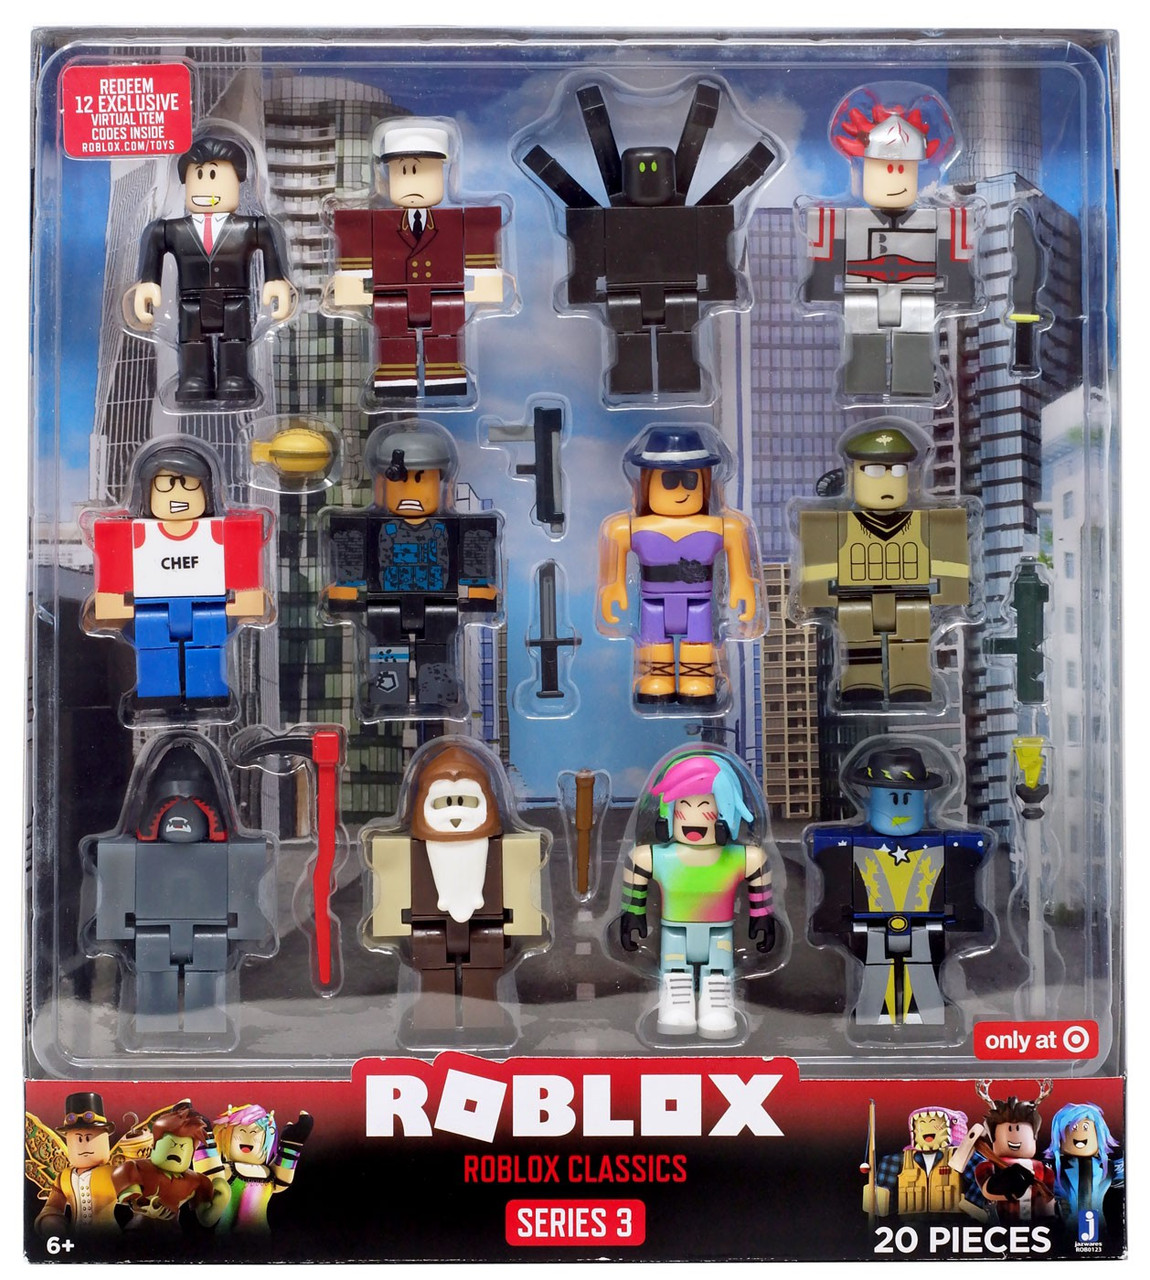 Series 3 Roblox Classics Exclusive Action Figure 12 Pack - images of roblox toys